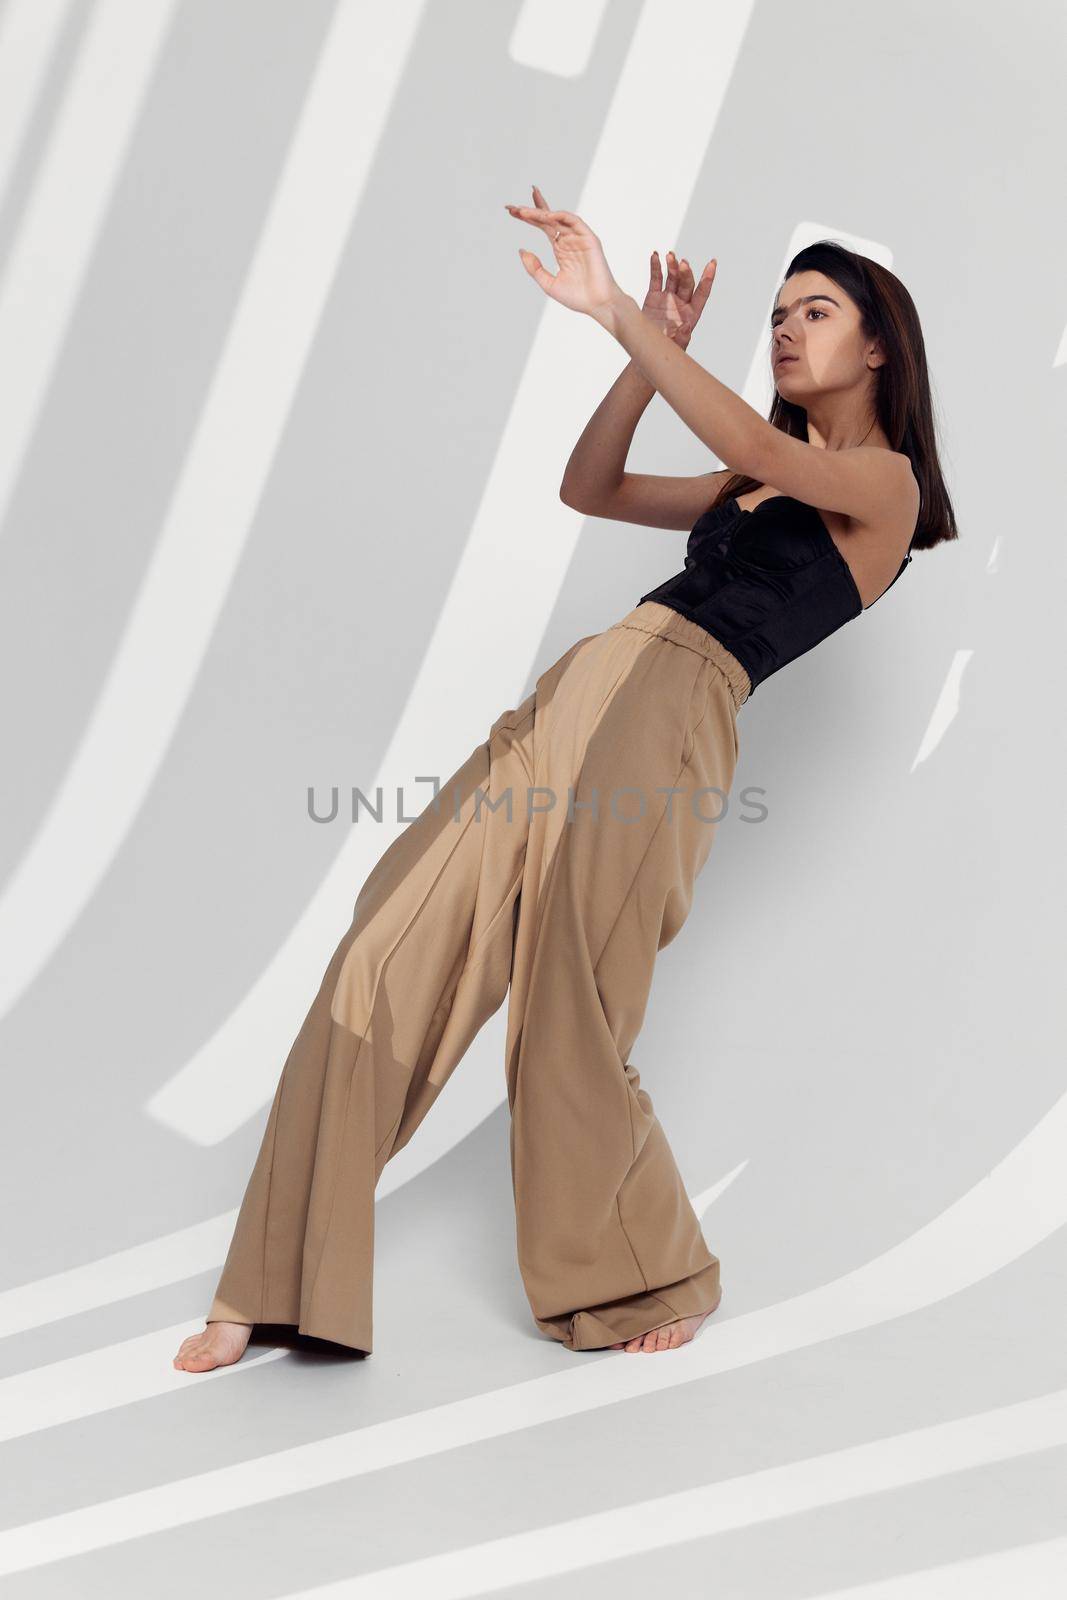 attractive woman in beige pants and black top gestures with her hands by SHOTPRIME